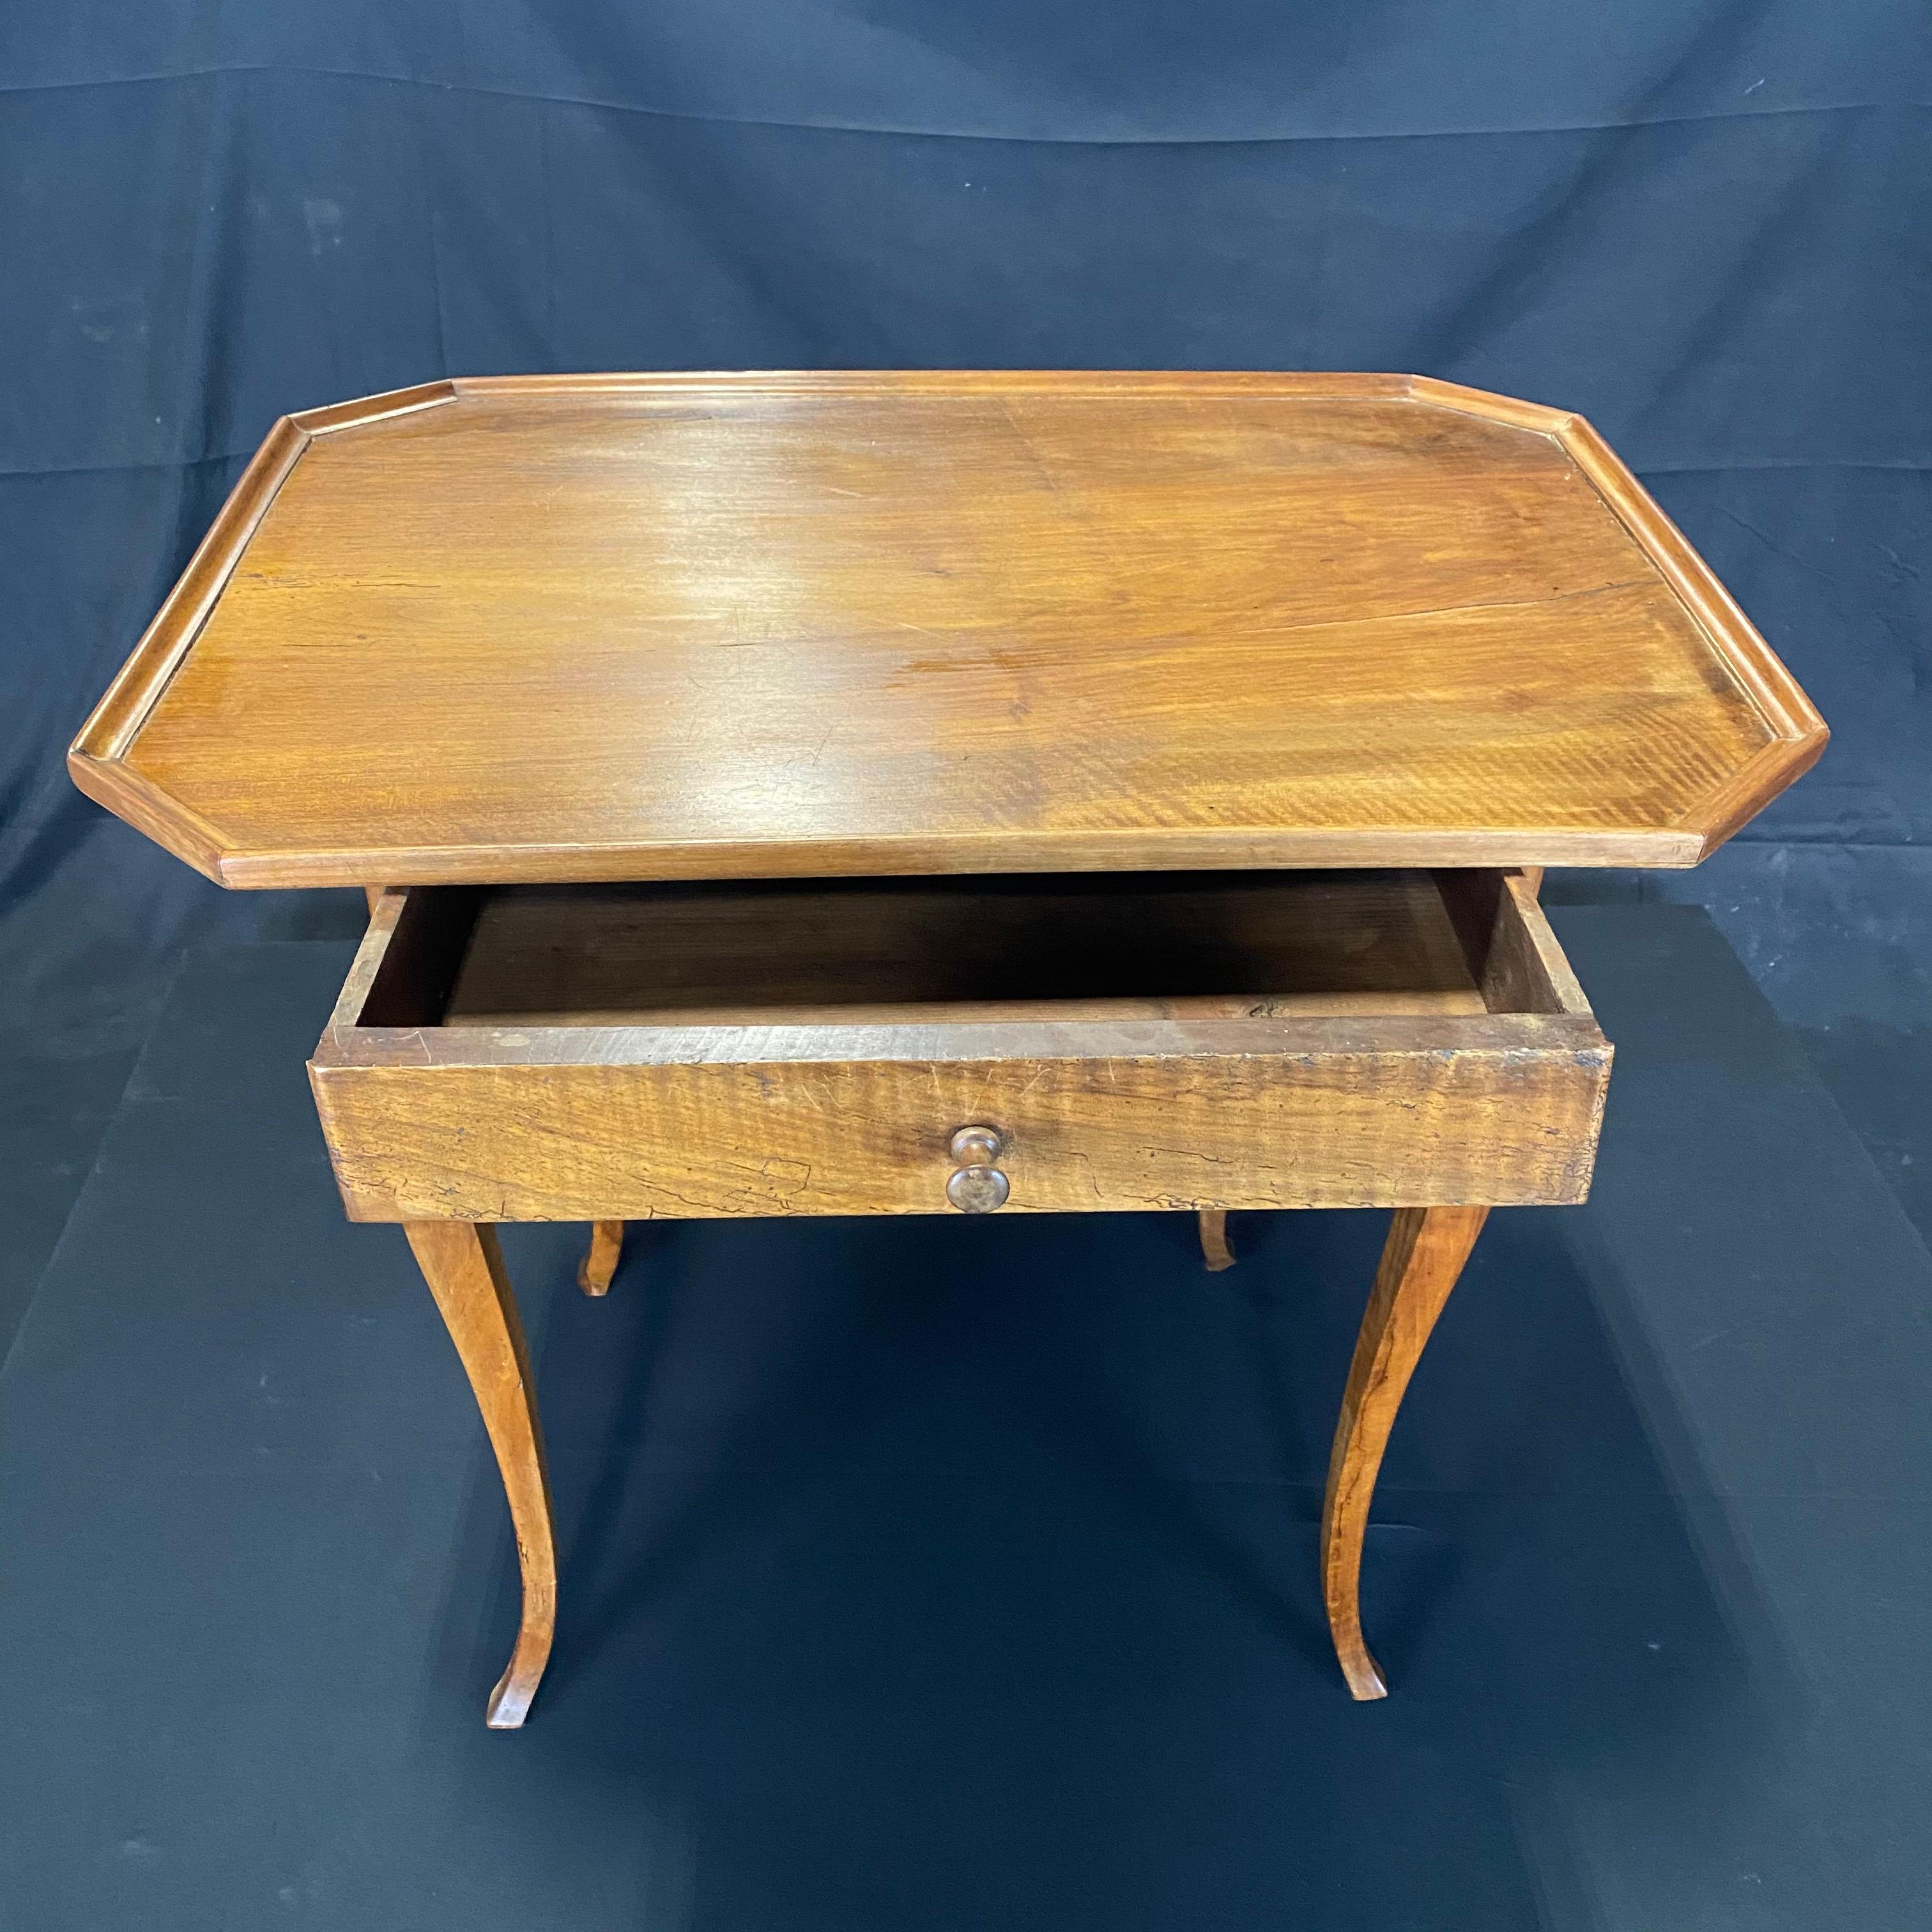 An late 19th century Louis XV style country French walnut side table or nightstand having curved legs and raised gallery. One front drawer is beautifully dovetailed with a small carved knob in the center. Handcrafted of solid walnut using pegged